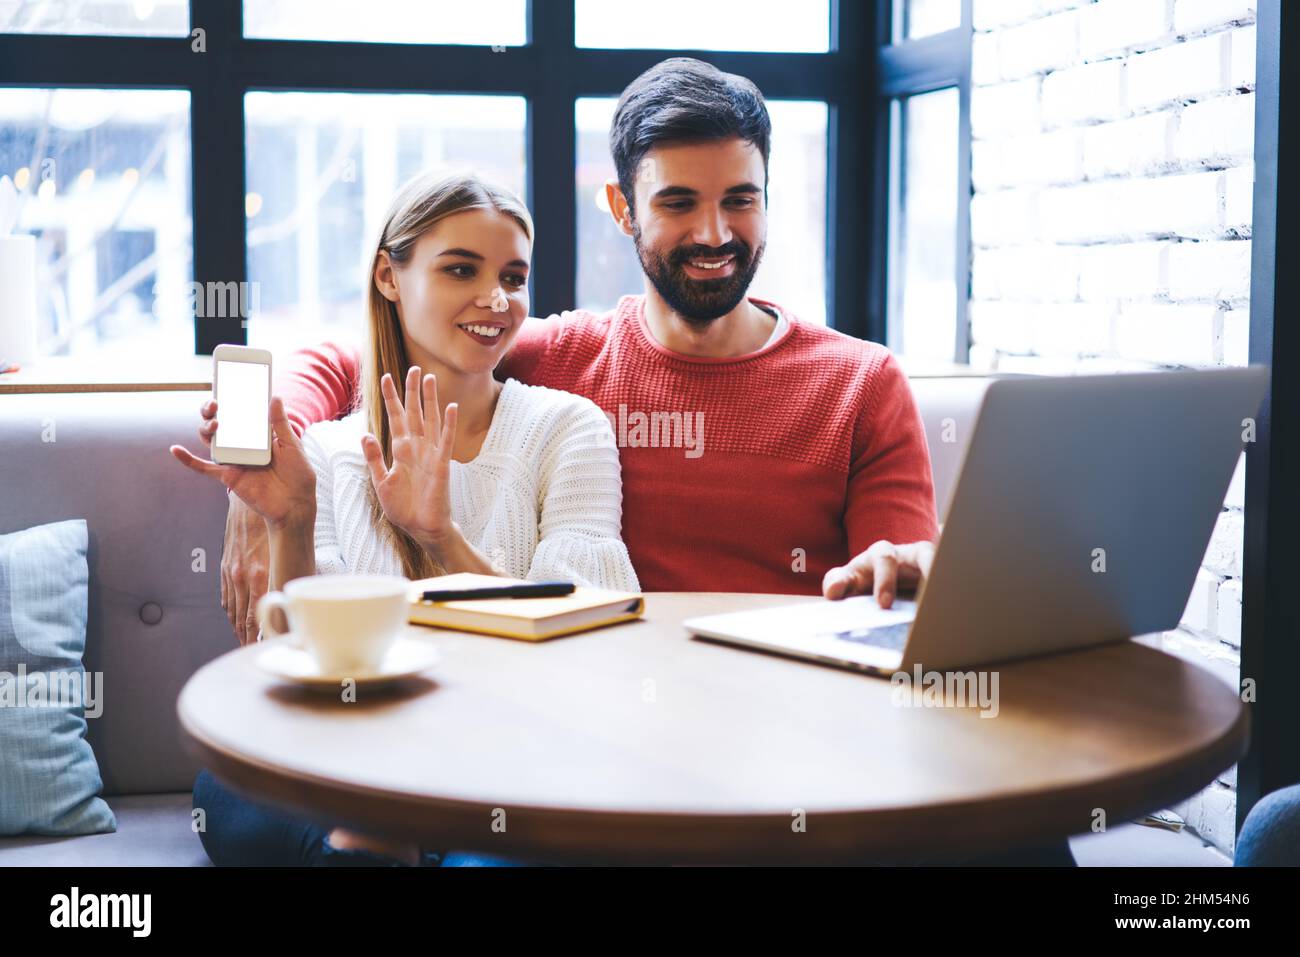 Smiling man and woman watching video on laptop in cozy cafeteria Stock Photo